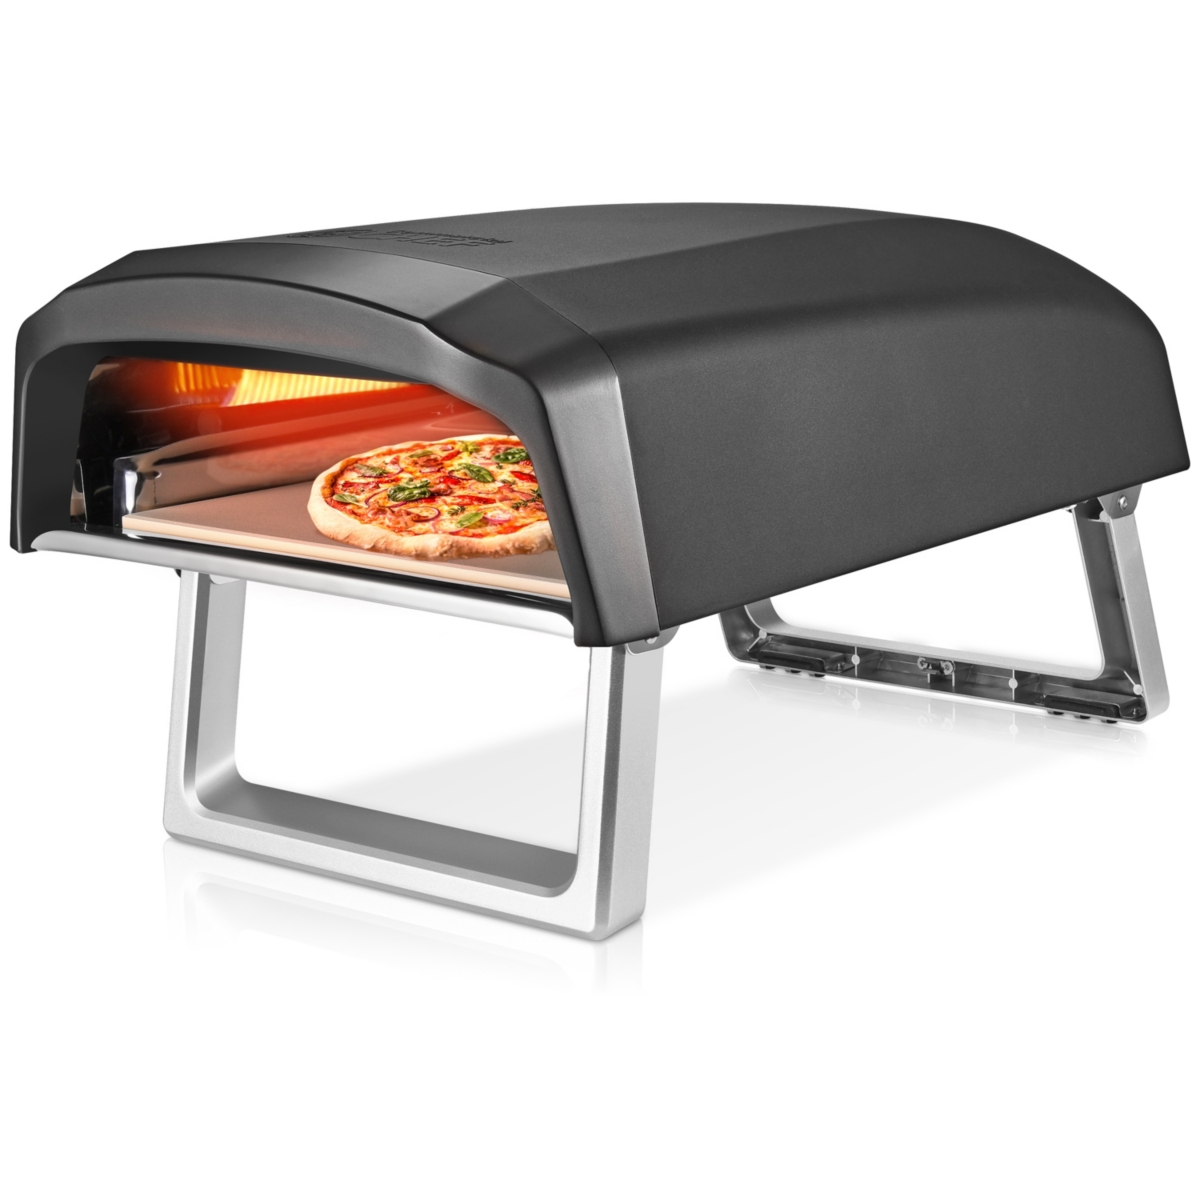 Outdoor Gas Pizza Oven with Dual L-Shaped Burner - Black